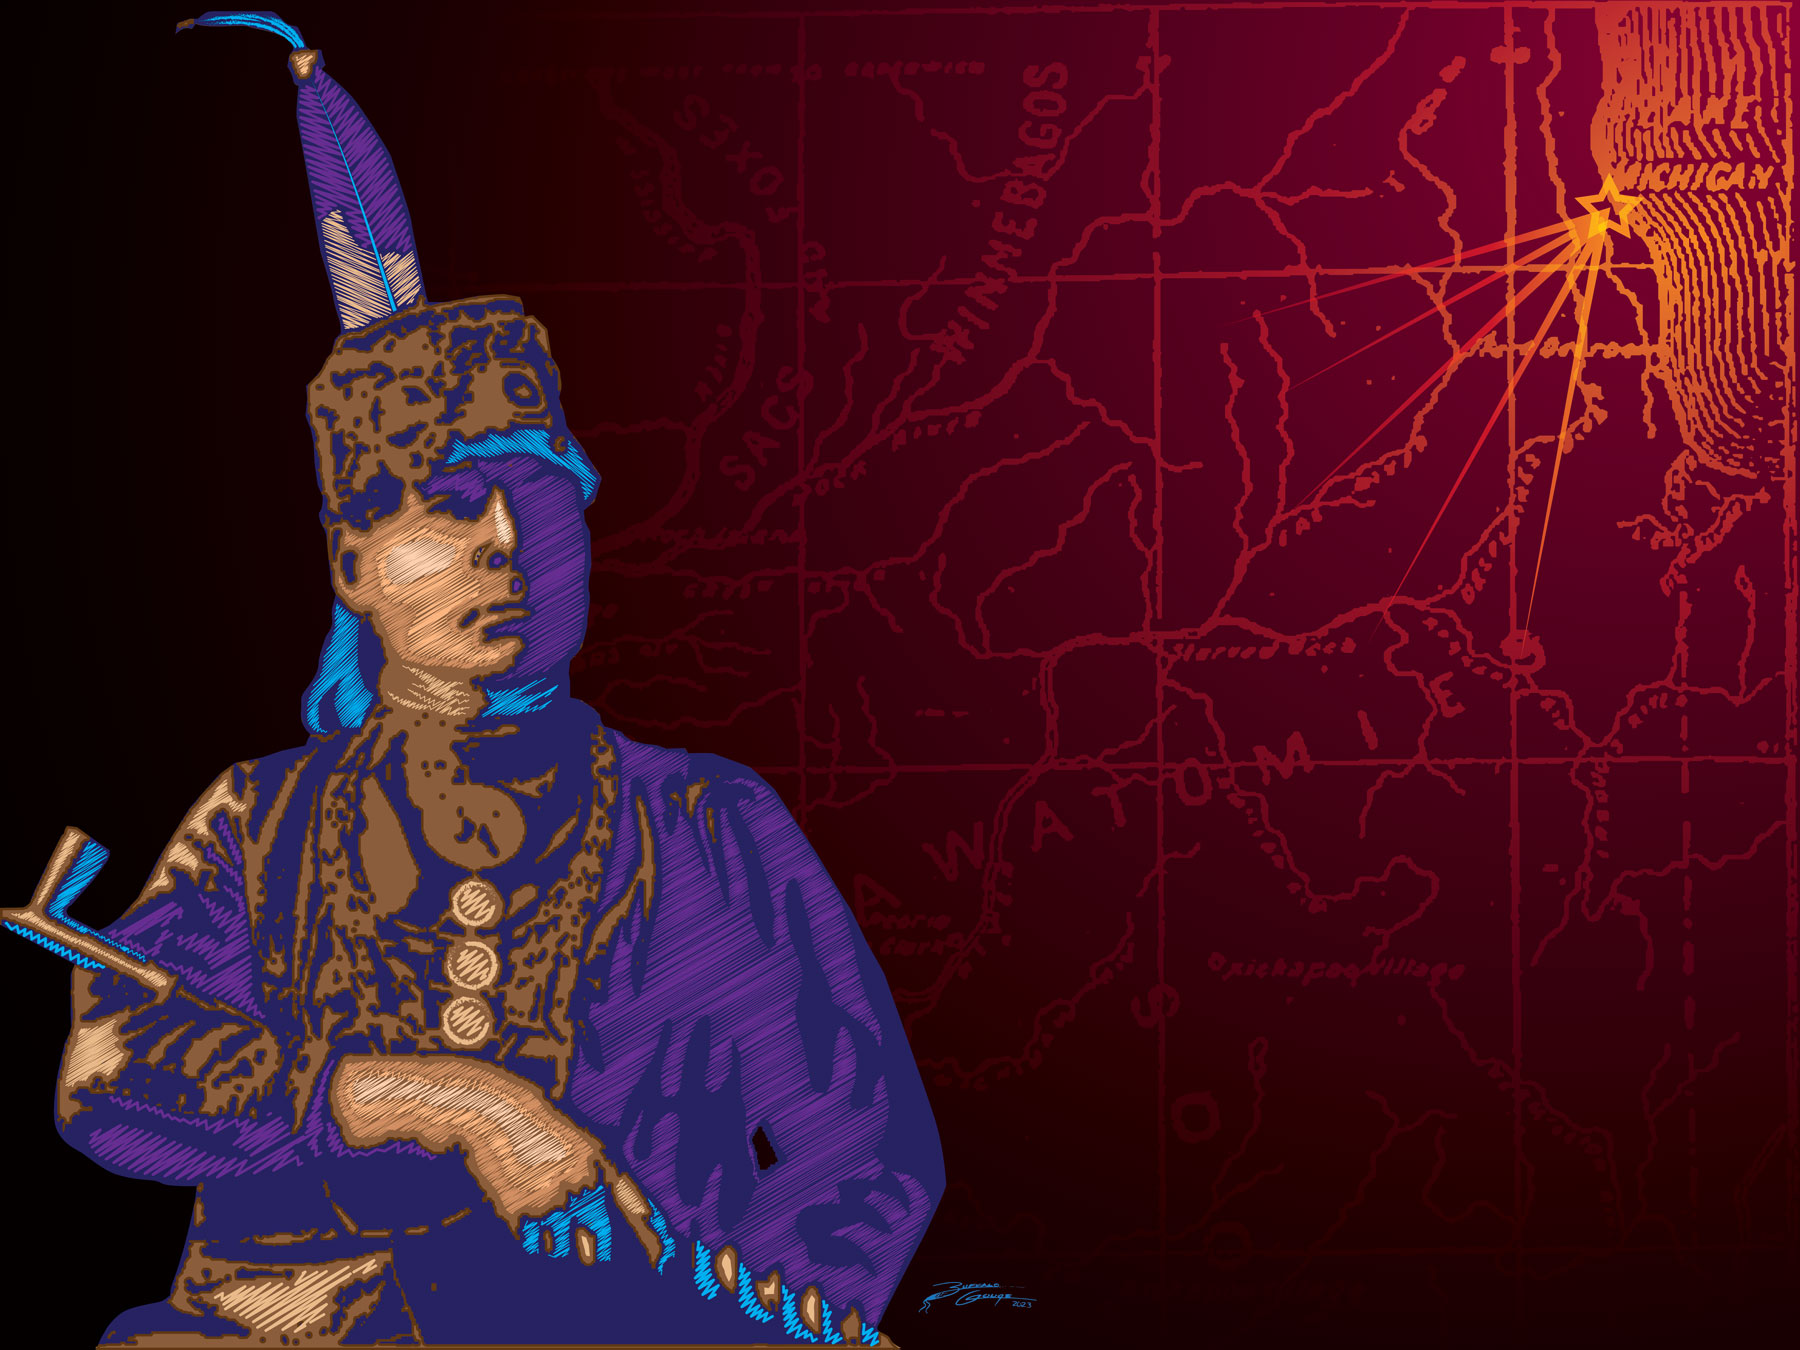 Expressive artwork of a Native American holding a pipe by artist Buffalo Gouge